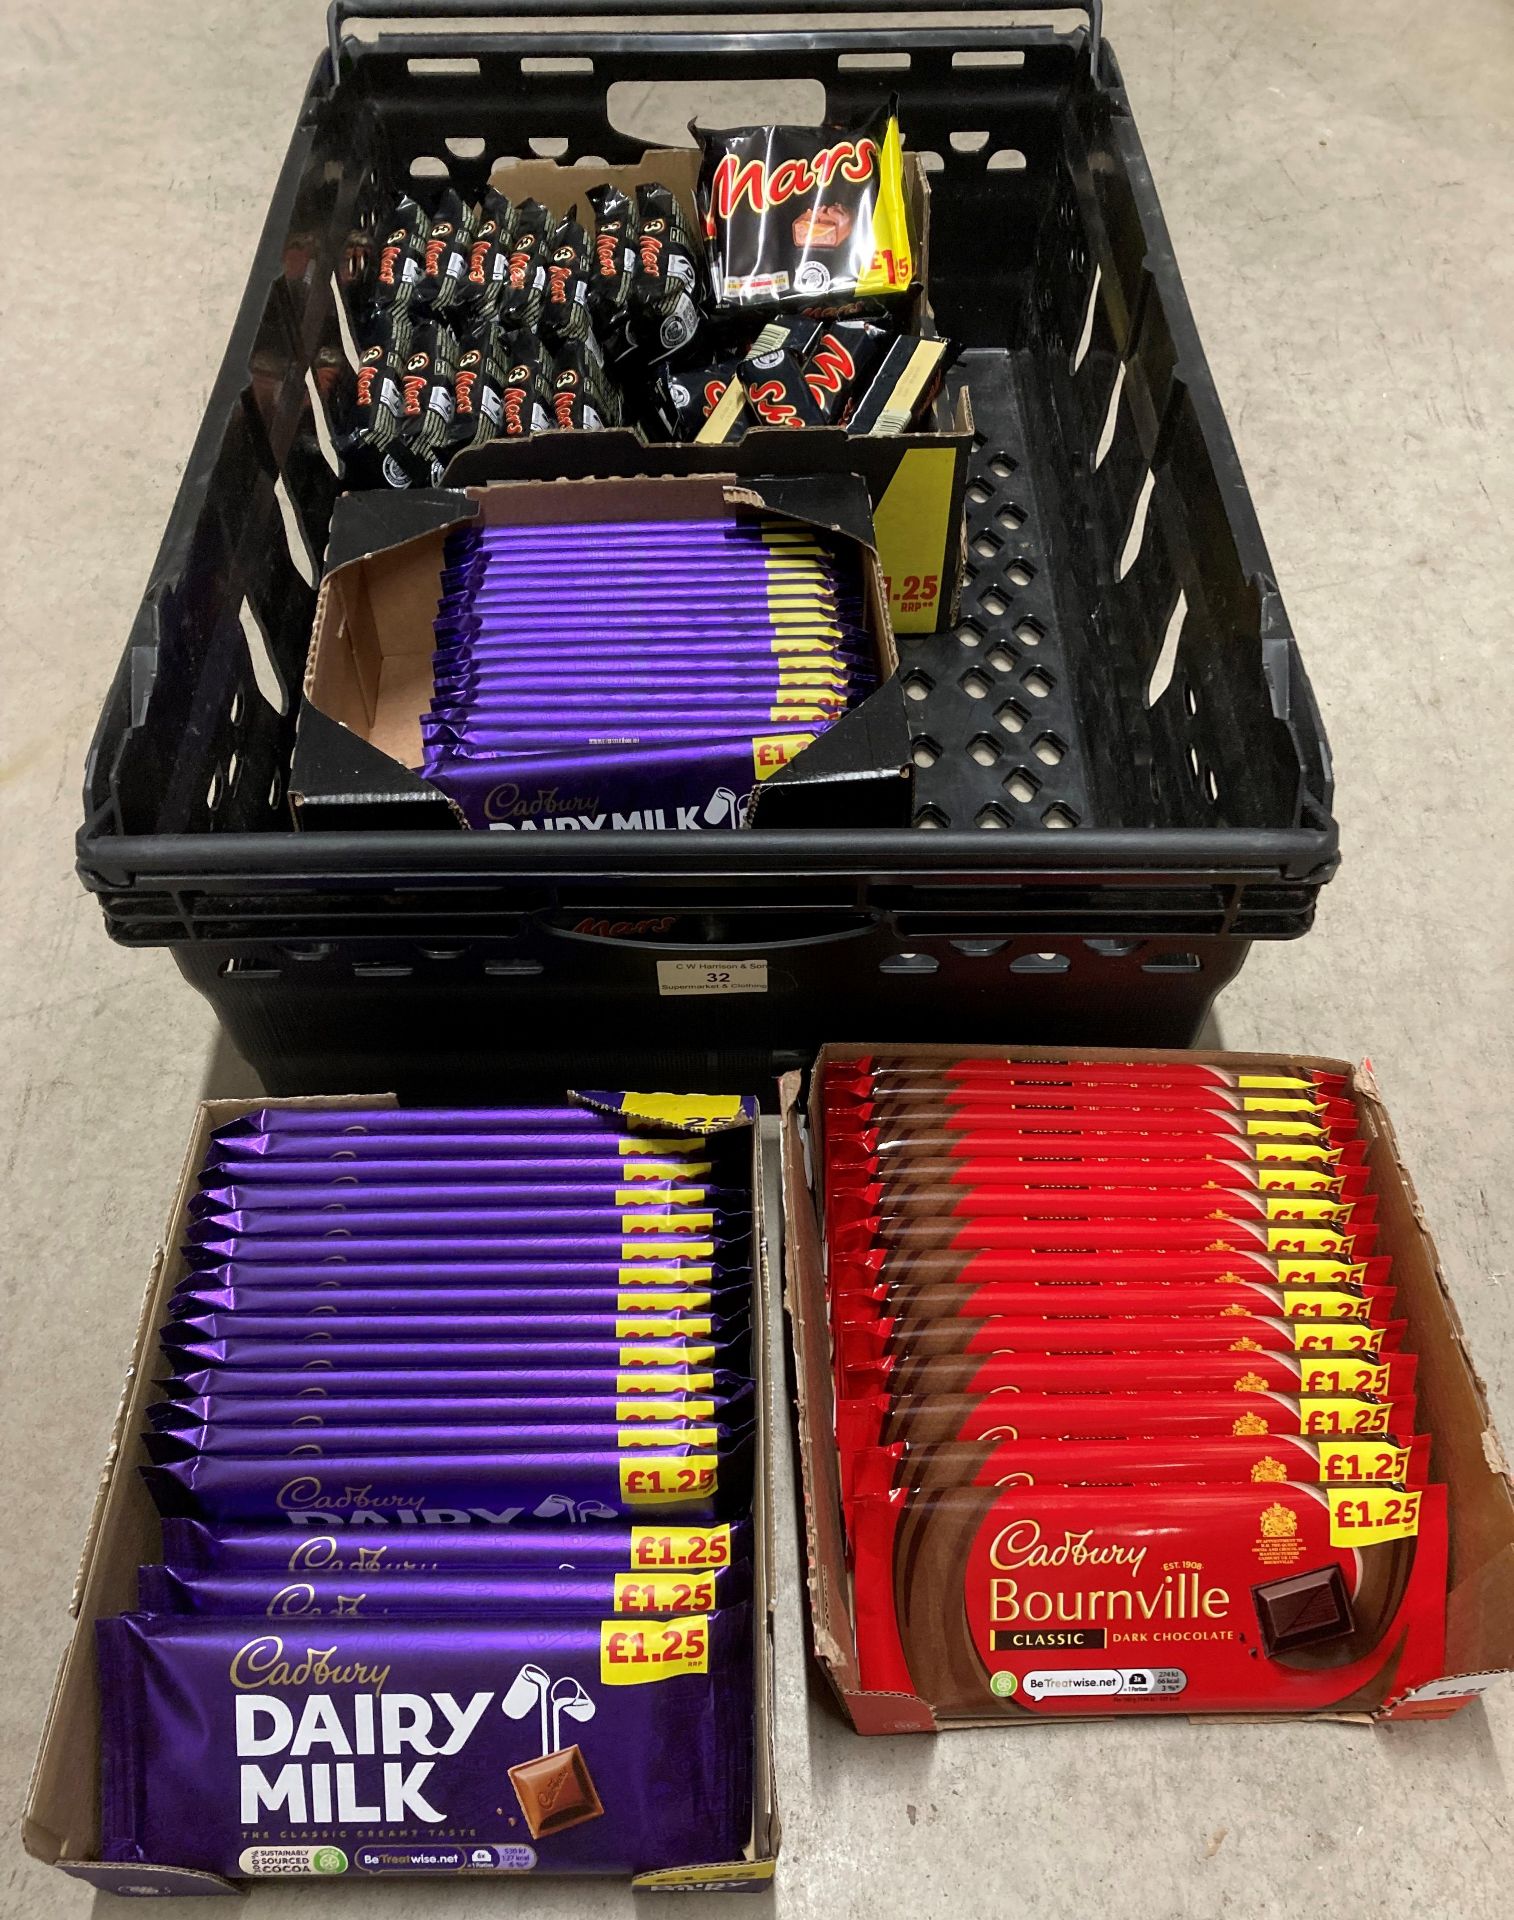 Contents to tray - 80 x packs and bars of Cadbury's Dairy Milk and Bournville,